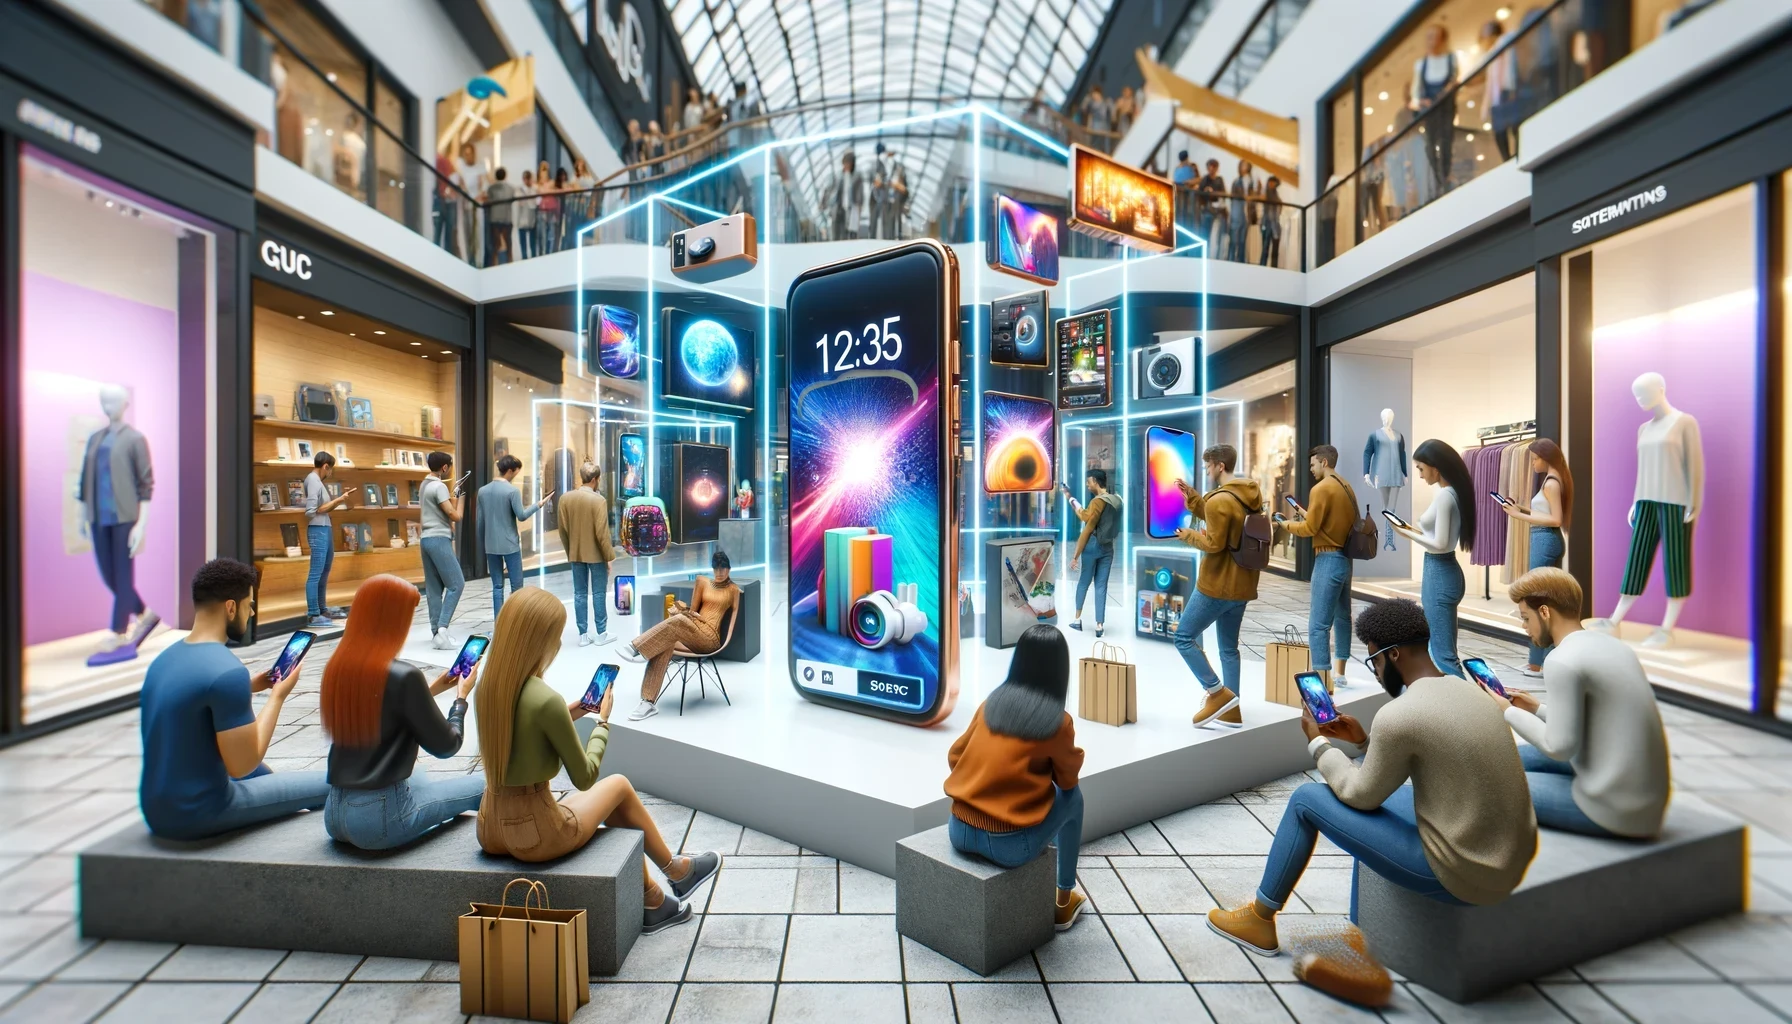 An interactive brand activation in a shopping mall, where consumers interact with augmented reality displays showing new products.